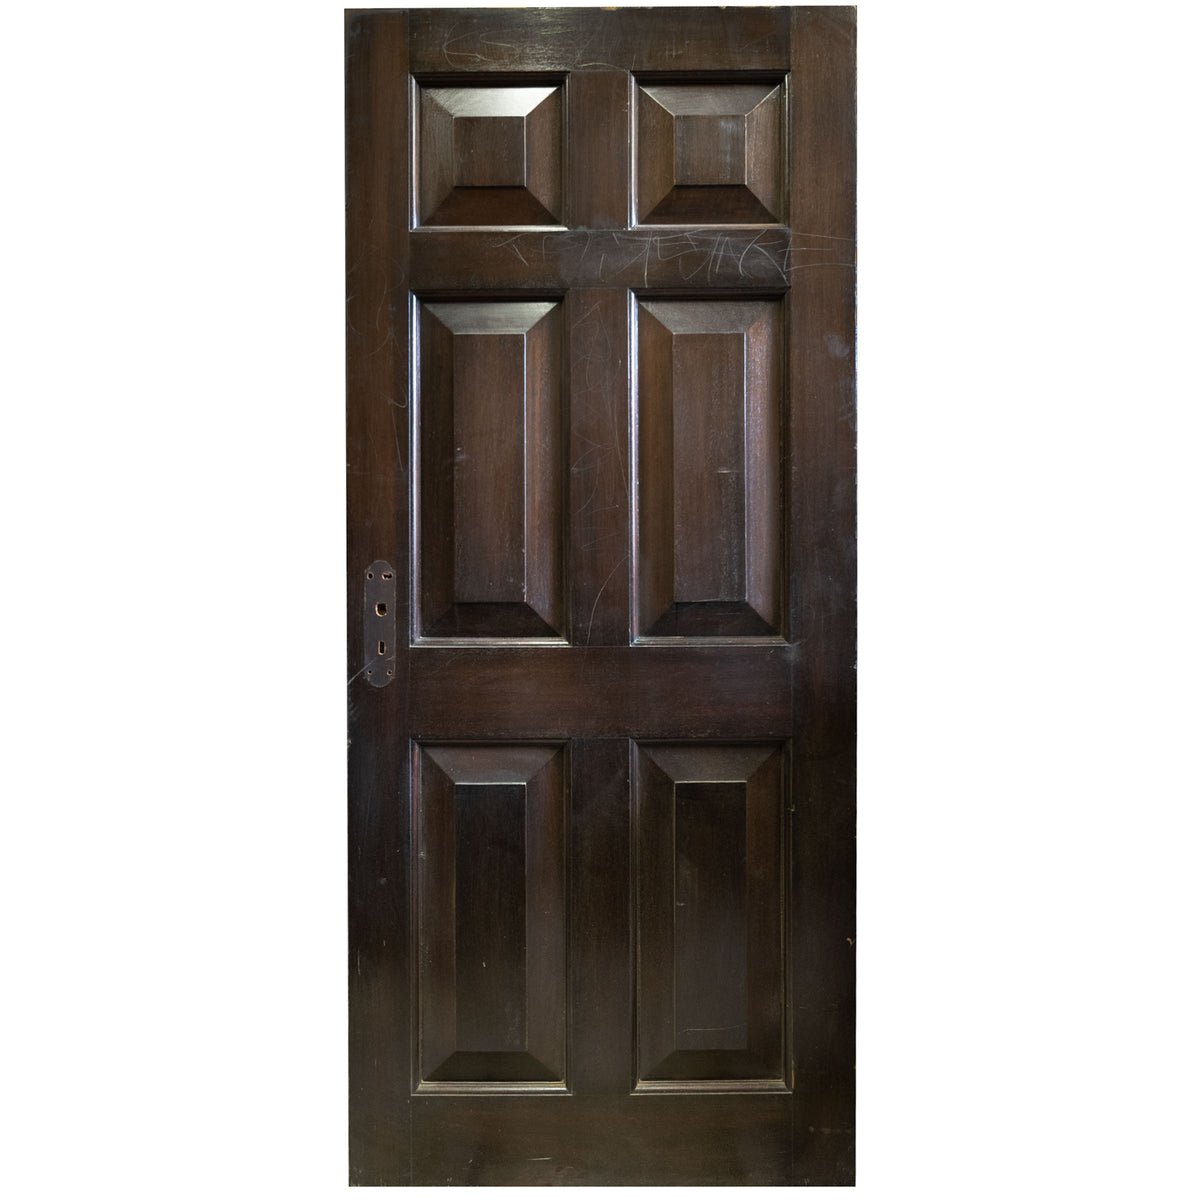 Reclaimed Solid Mahogany Six Panel Door 196 X 83.5cm | The Architectural Forum